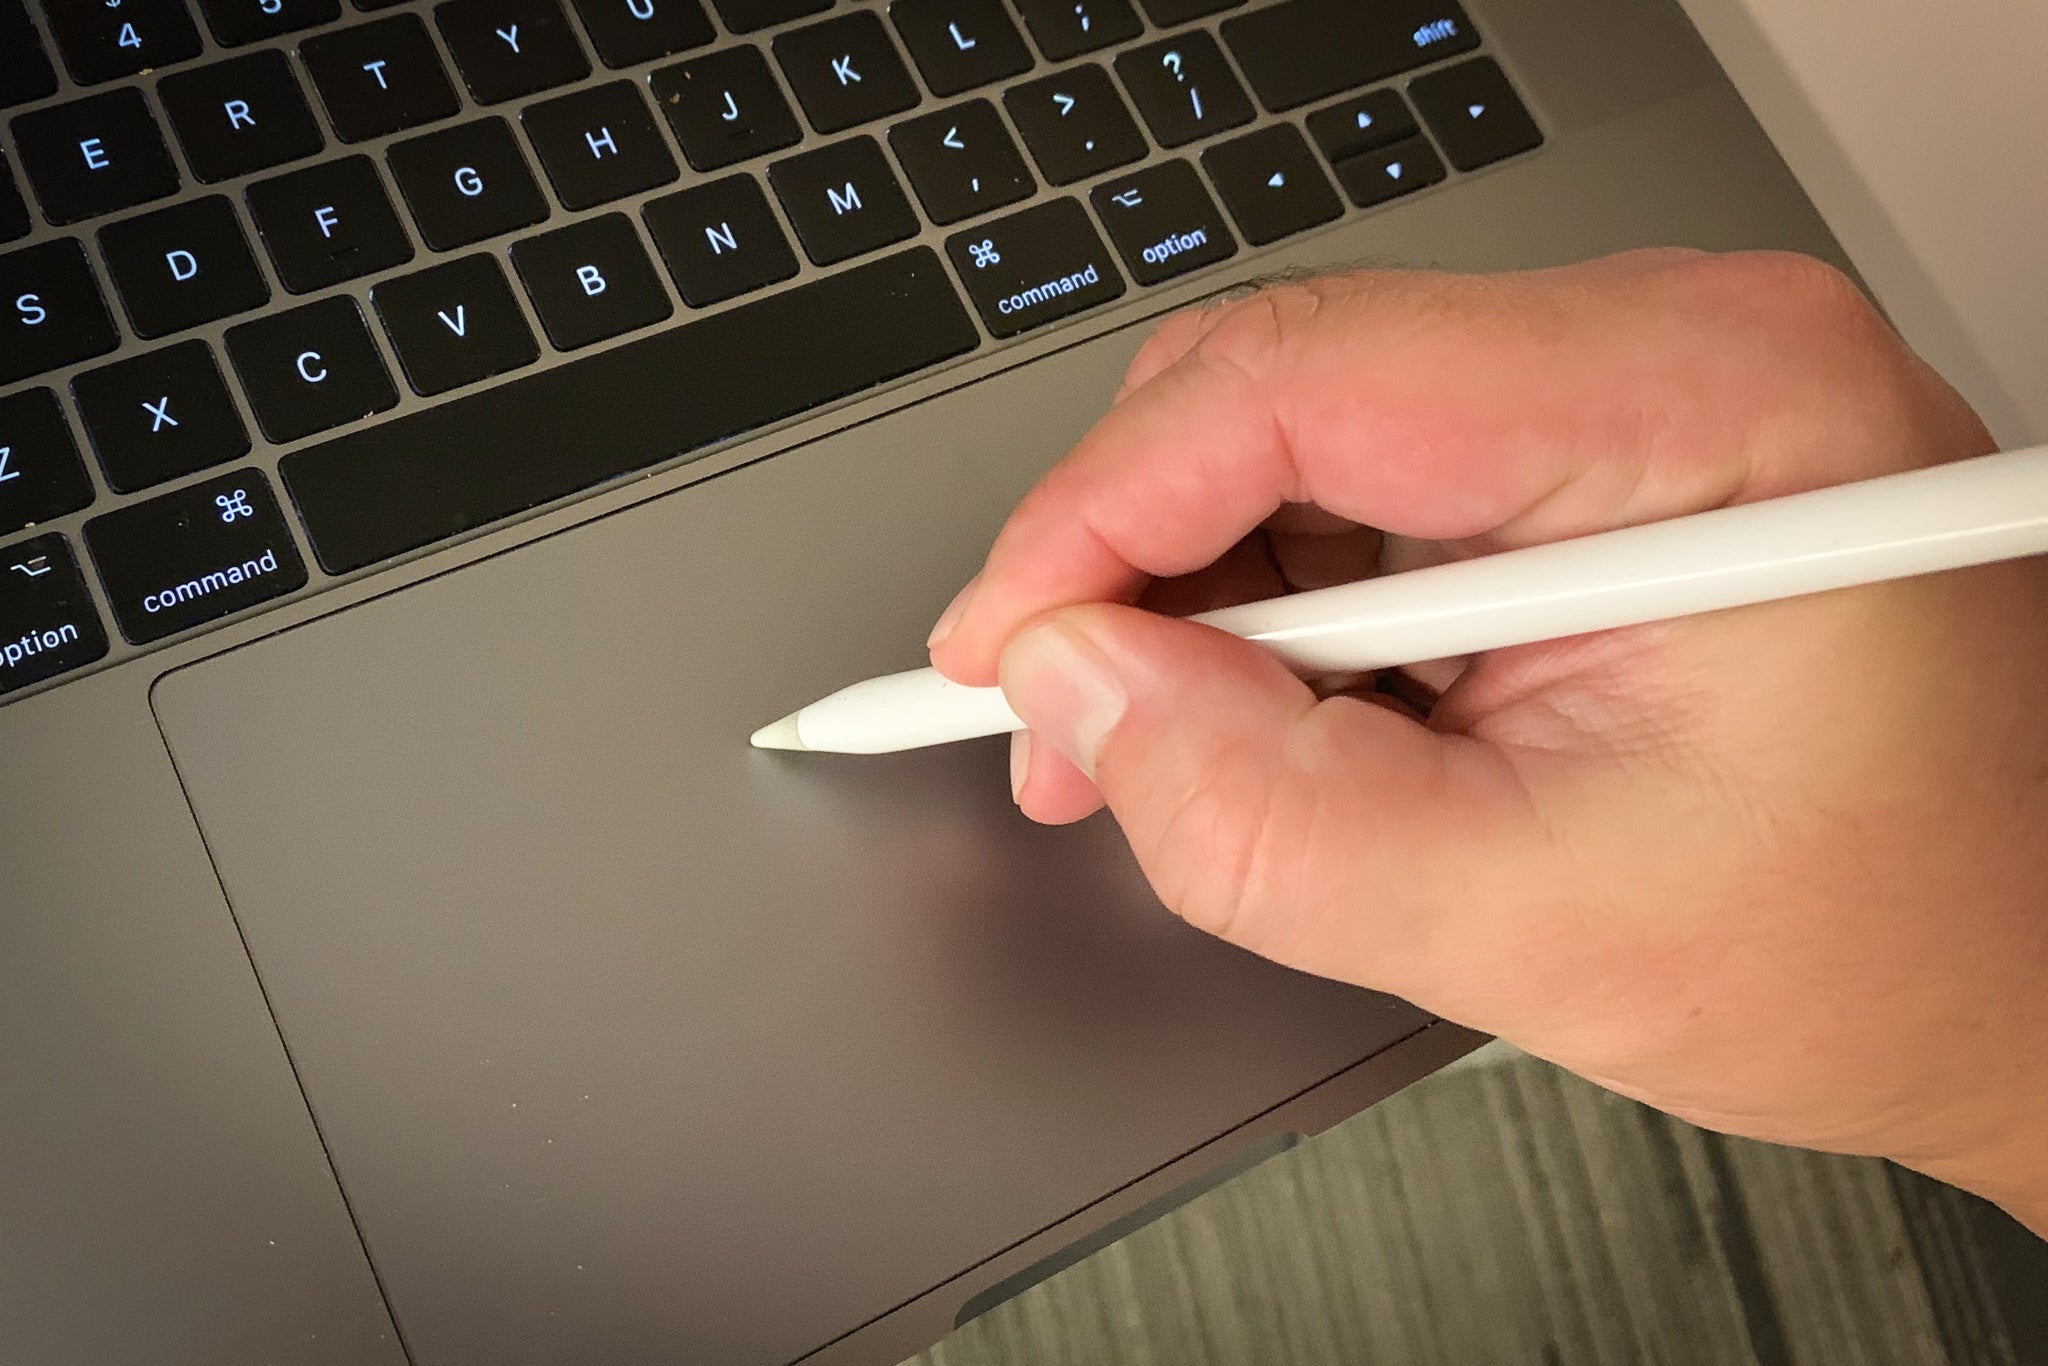 Here’s why the Apple Pencil would be a good fit for the iPhone | Macworld